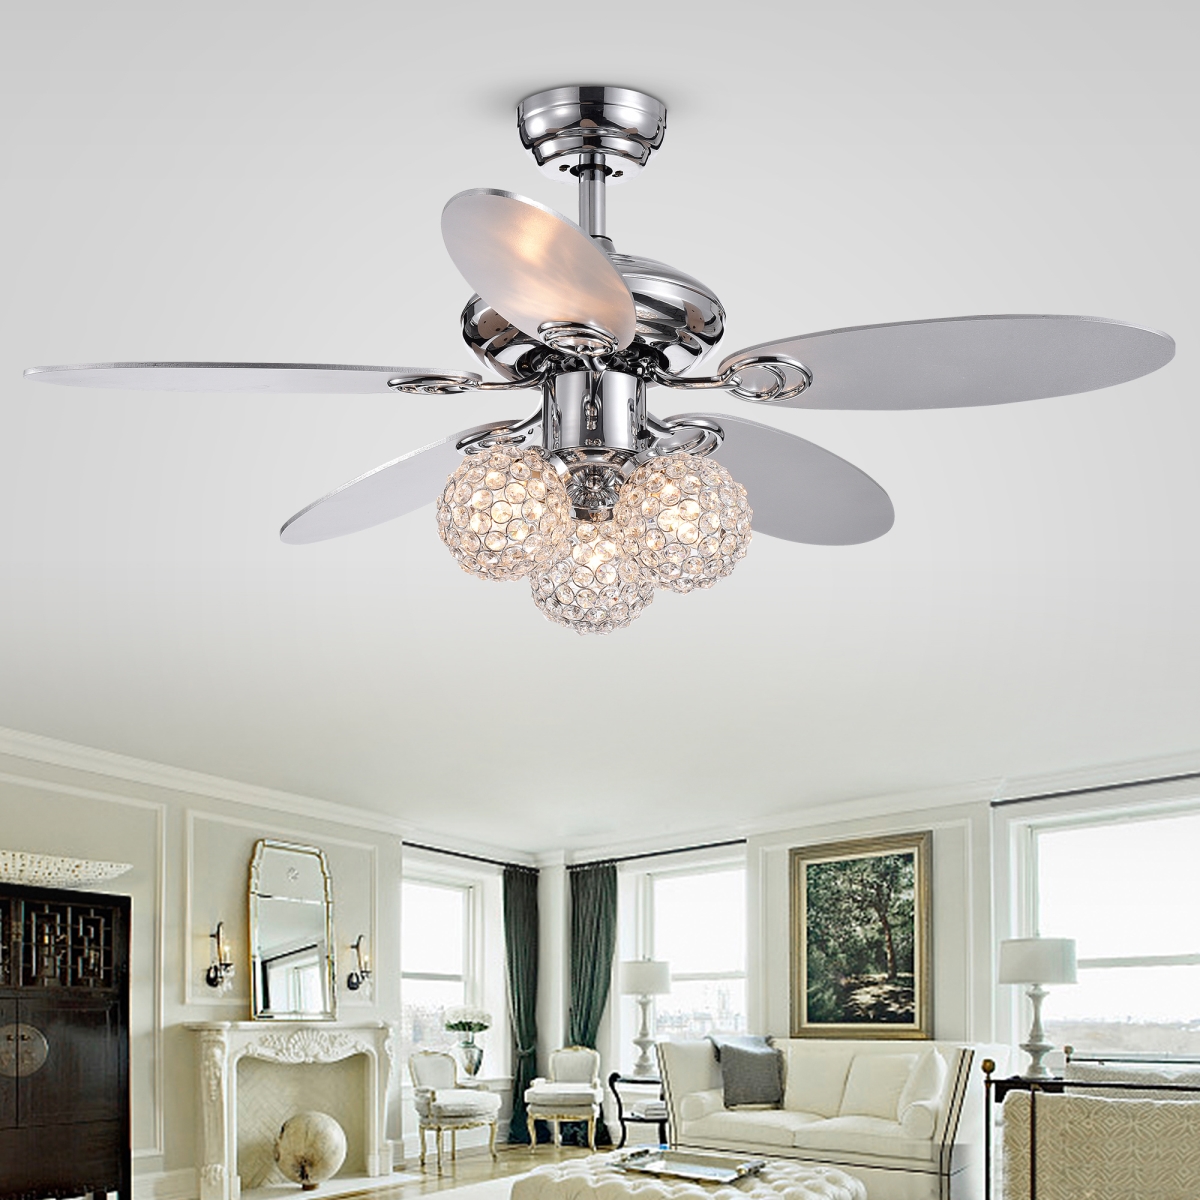 Cfl-8279remo-ch 42 In. Casimer 5-blade 3-light Crystal Bronze Ceiling Fan, Chrome